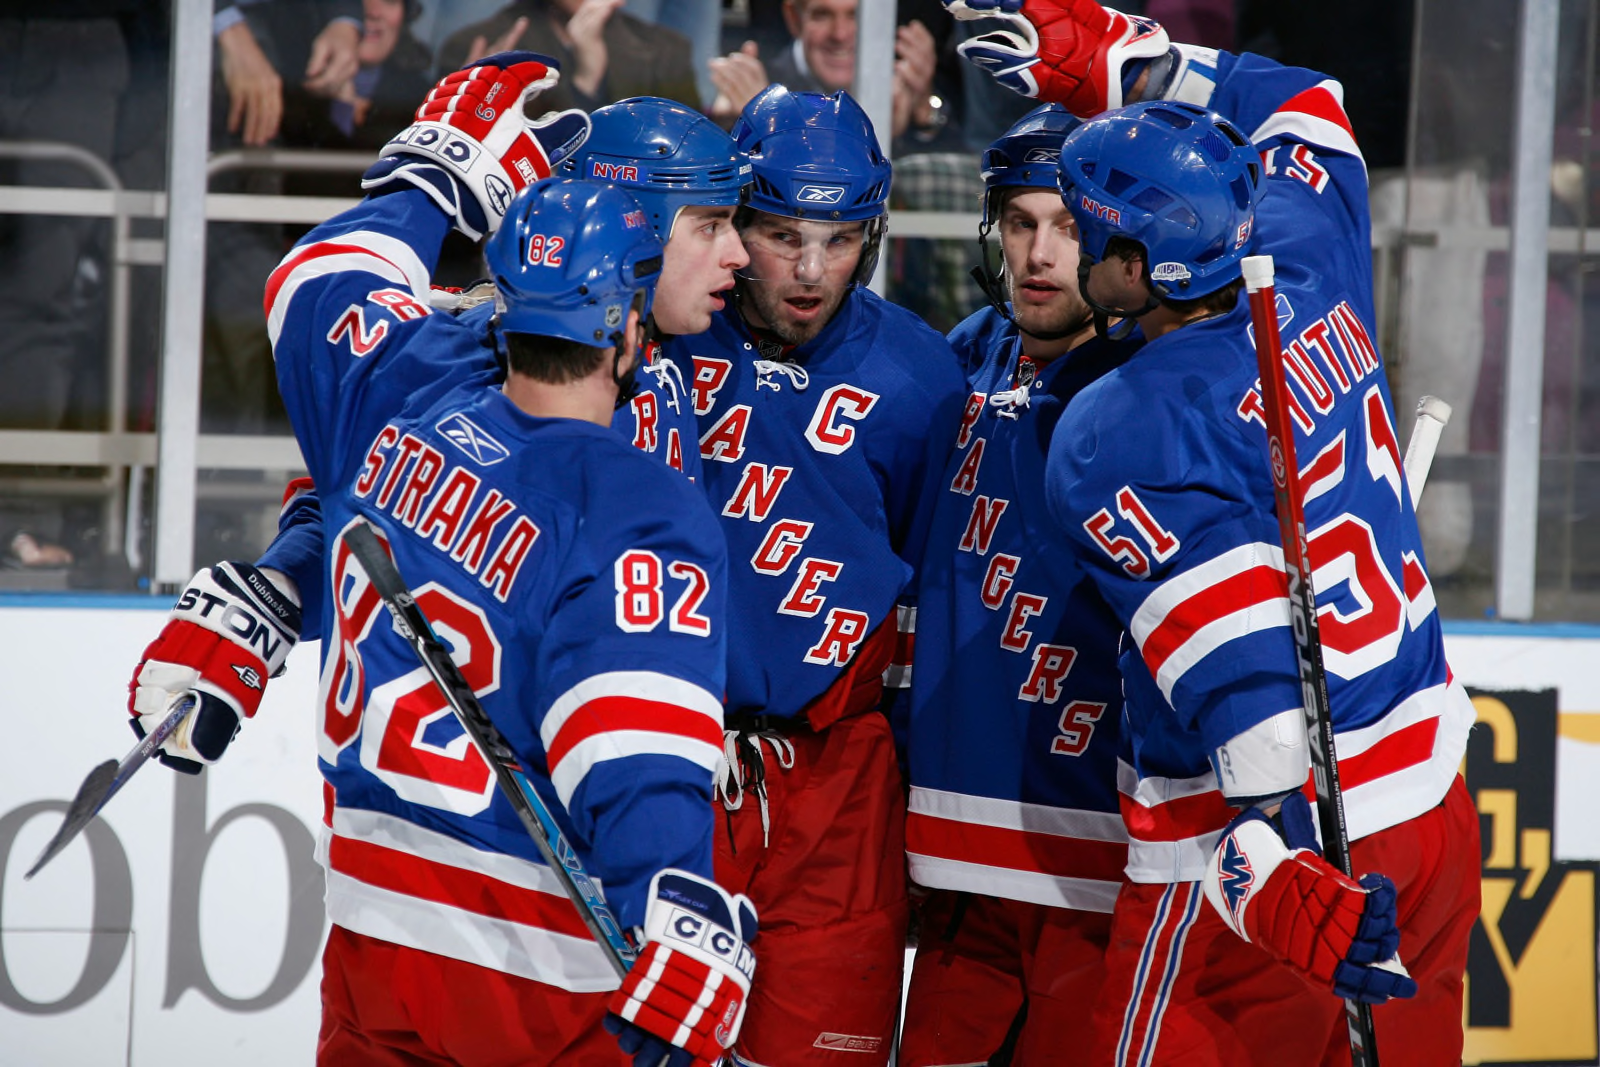 Jagr and Straka Help Put the Rangers in Control - The New York Times